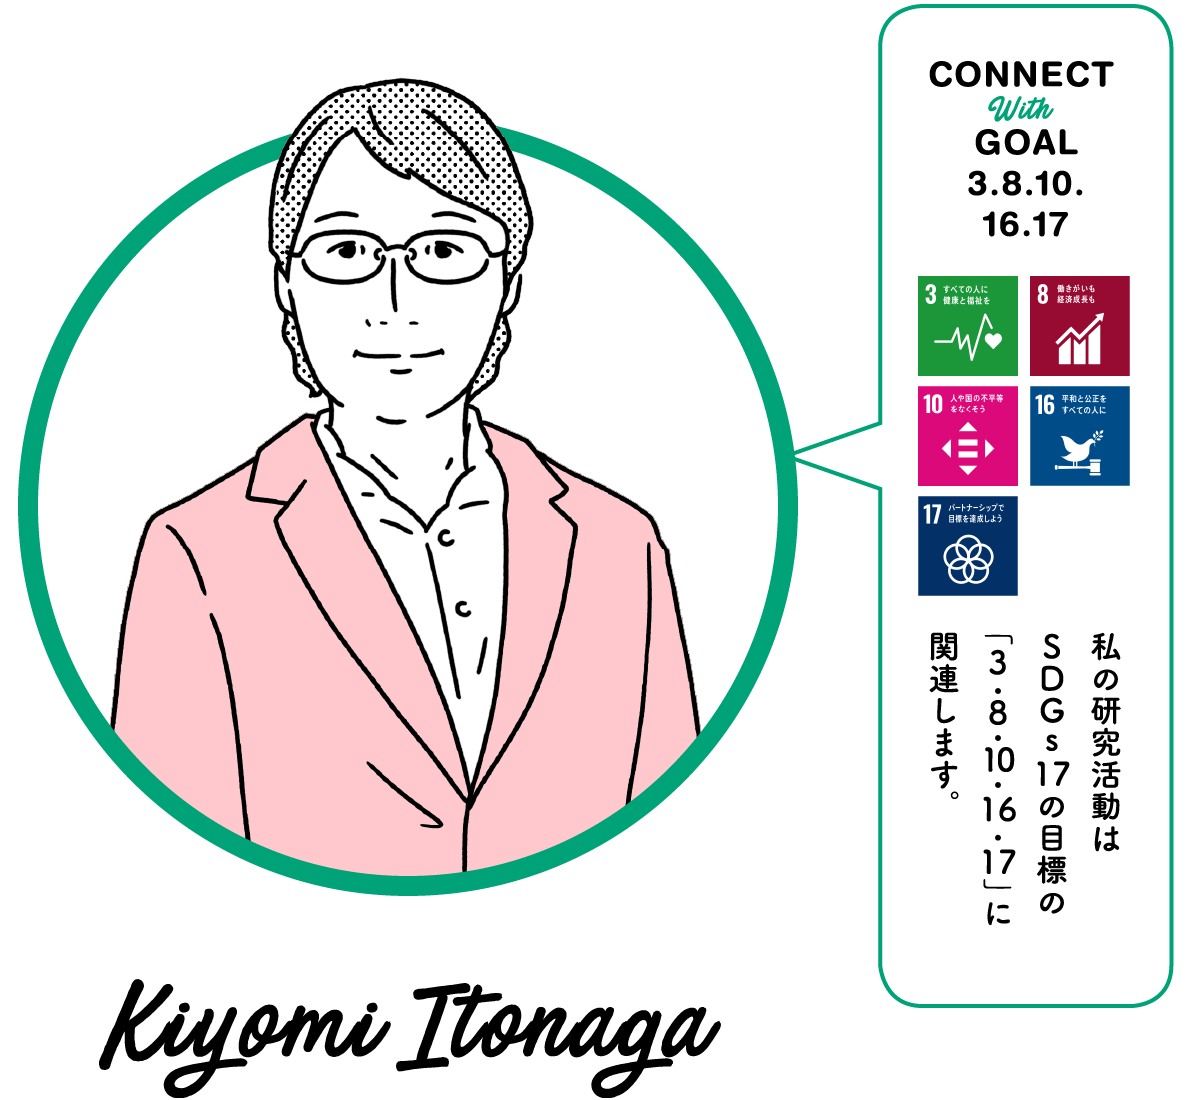 My research activities are related to the SDGs 17 goals "3, 8, 10, 16, and 17." Kiyomi Itonaga